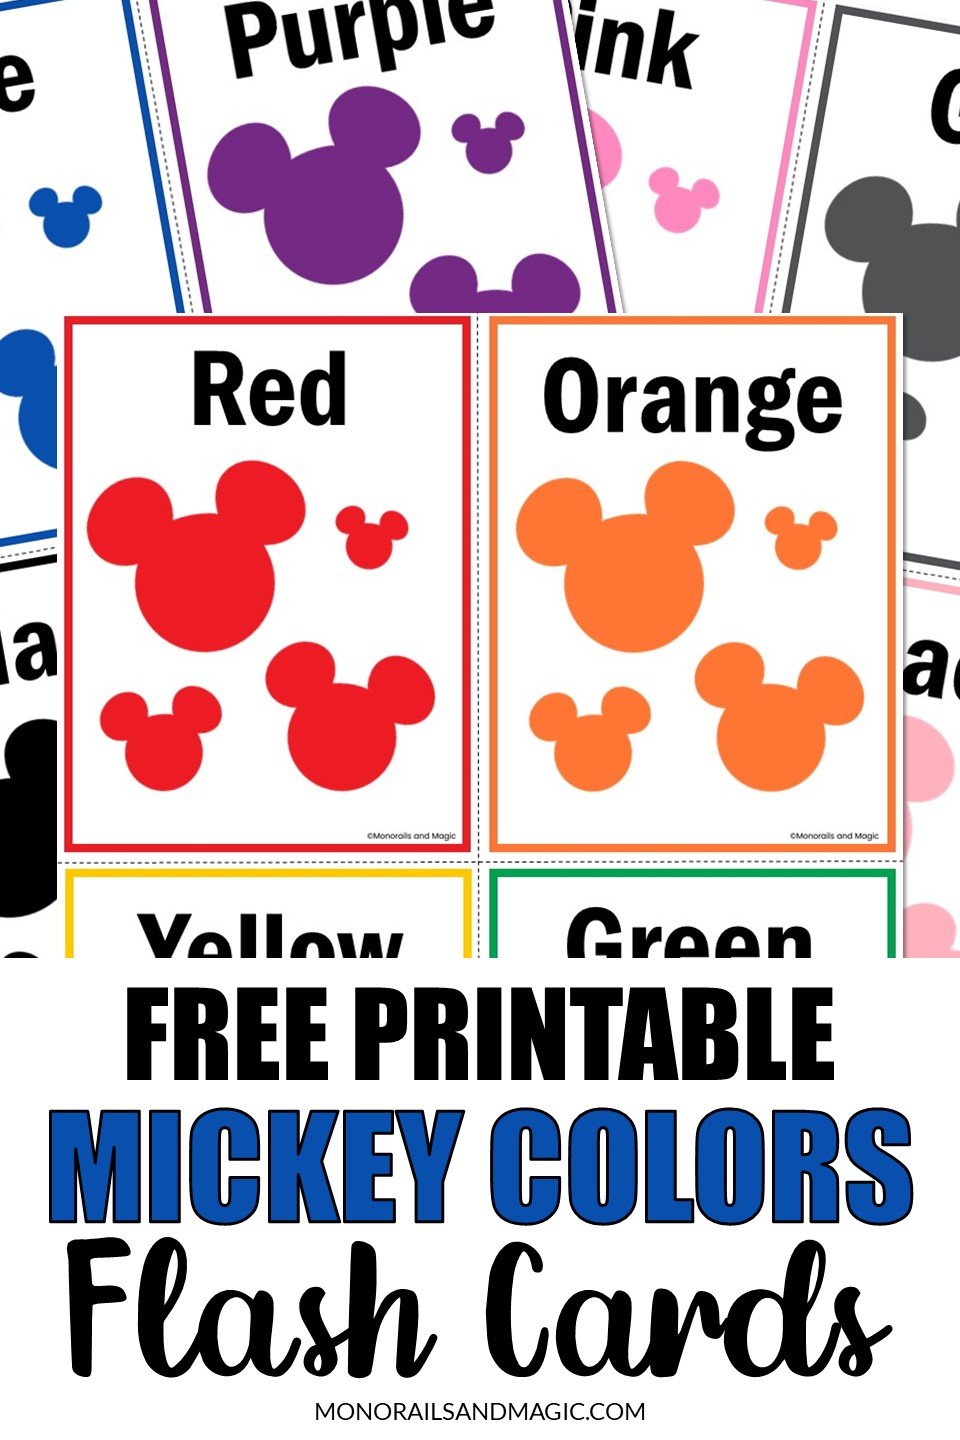 Free printable Mickey flash cards in 12 different colors.